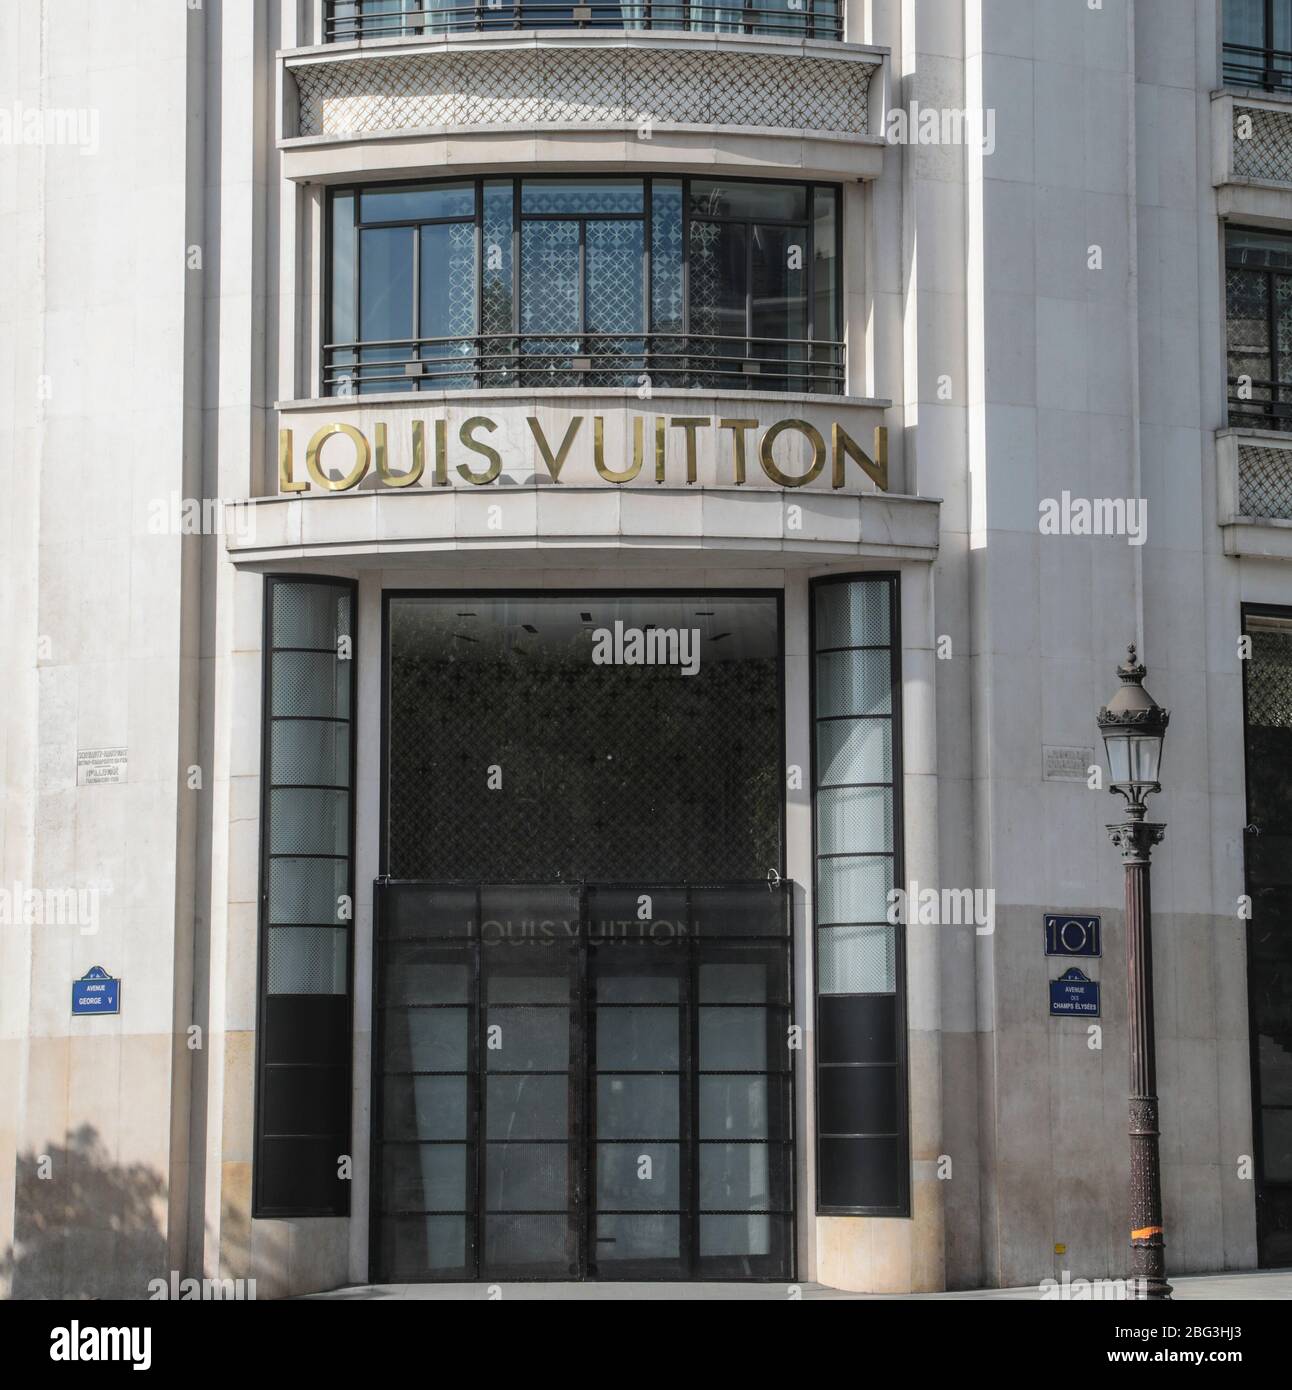 File photo dated September 5, 2012 of Louis Vuitton (LVMH) logo in  Deauville, France. Vendome sold part of the brand rights of its name to  Louis Vuitton. In 2018, shortly after the